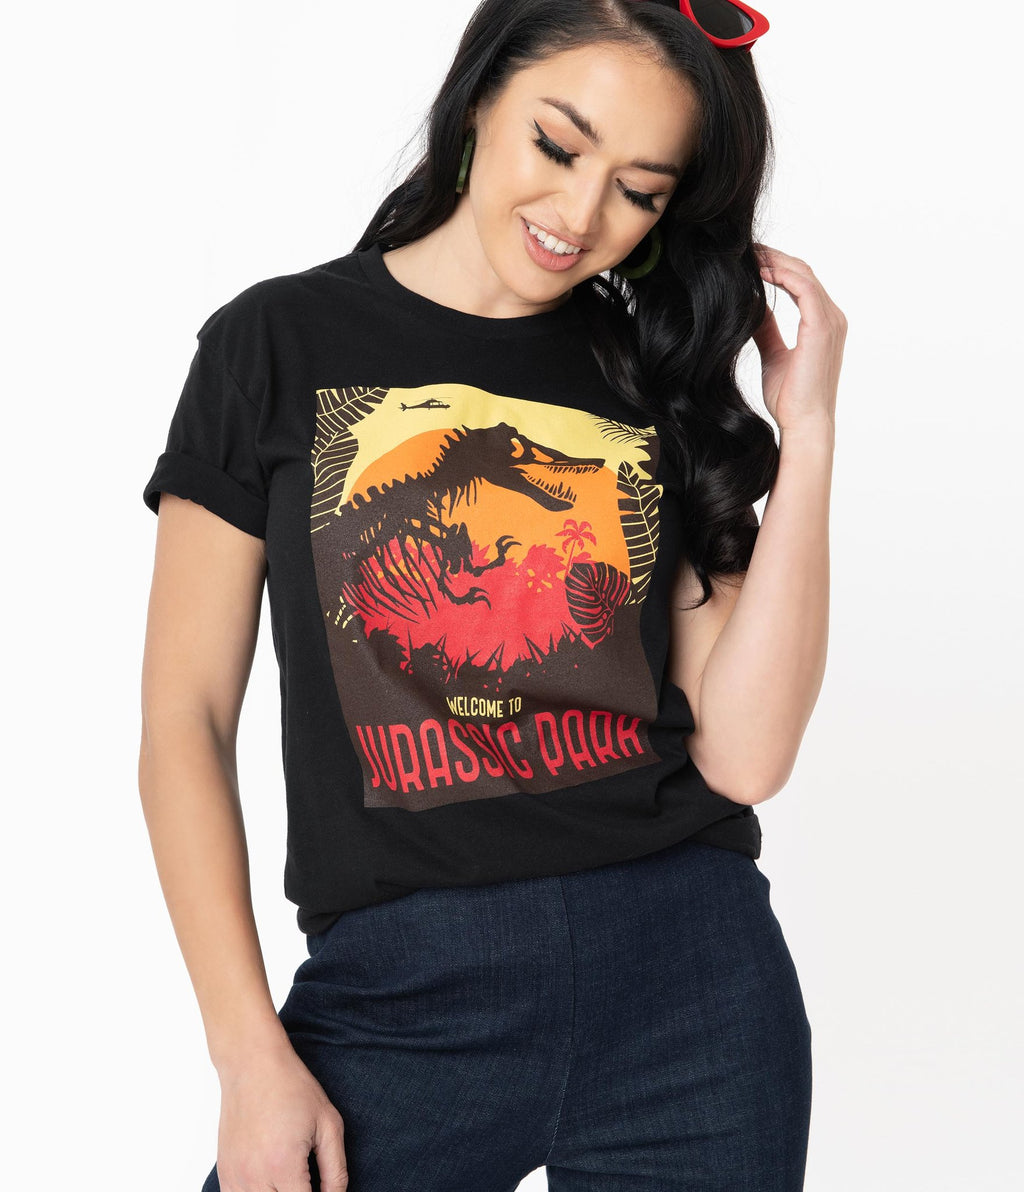 Jurassic Park x Unique Vintage Welcome To Jurassic Park Unisex Tee (XS ONLY)